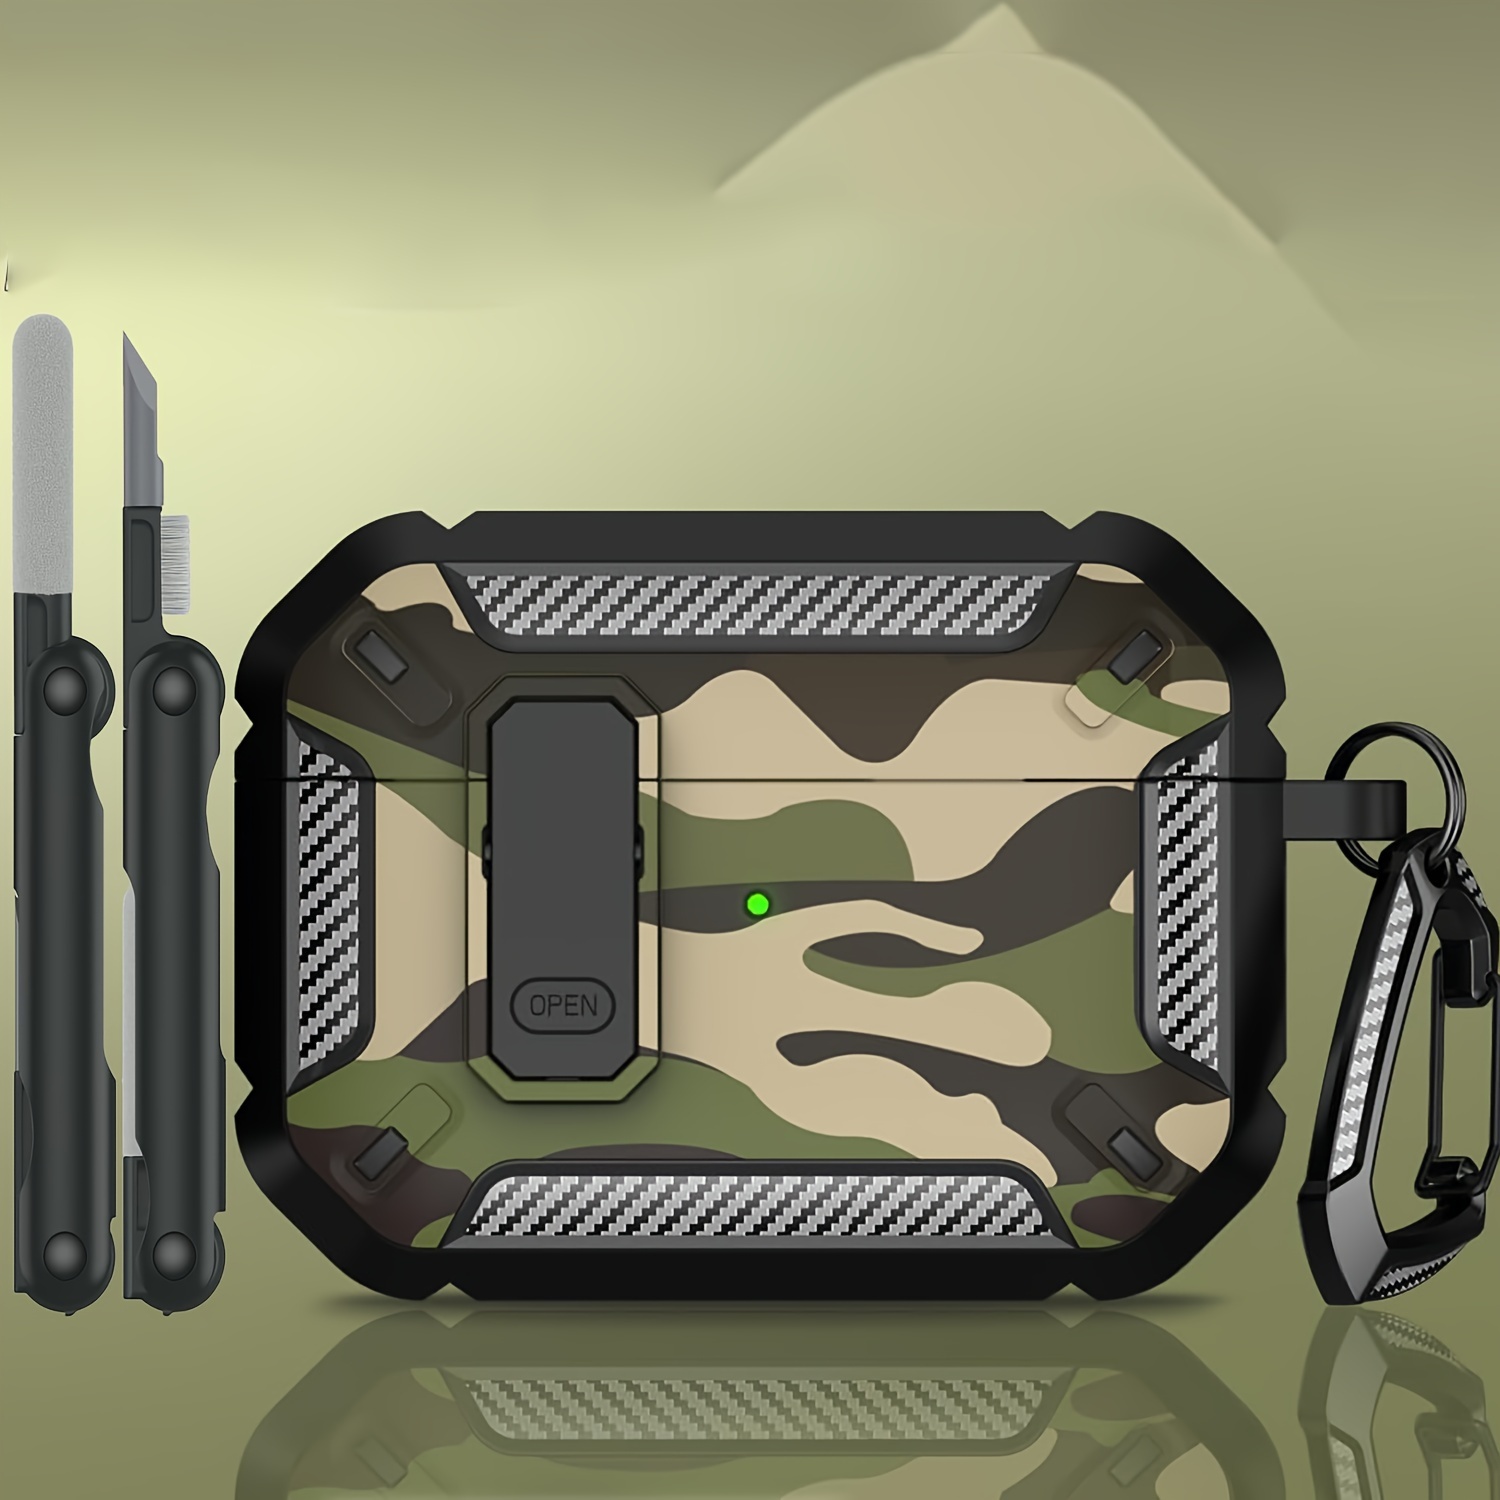 

Cover With Cleaner Kit, Military Hard Shell Protective Armor With Lock For Charging Case 2022, Front Led Visible